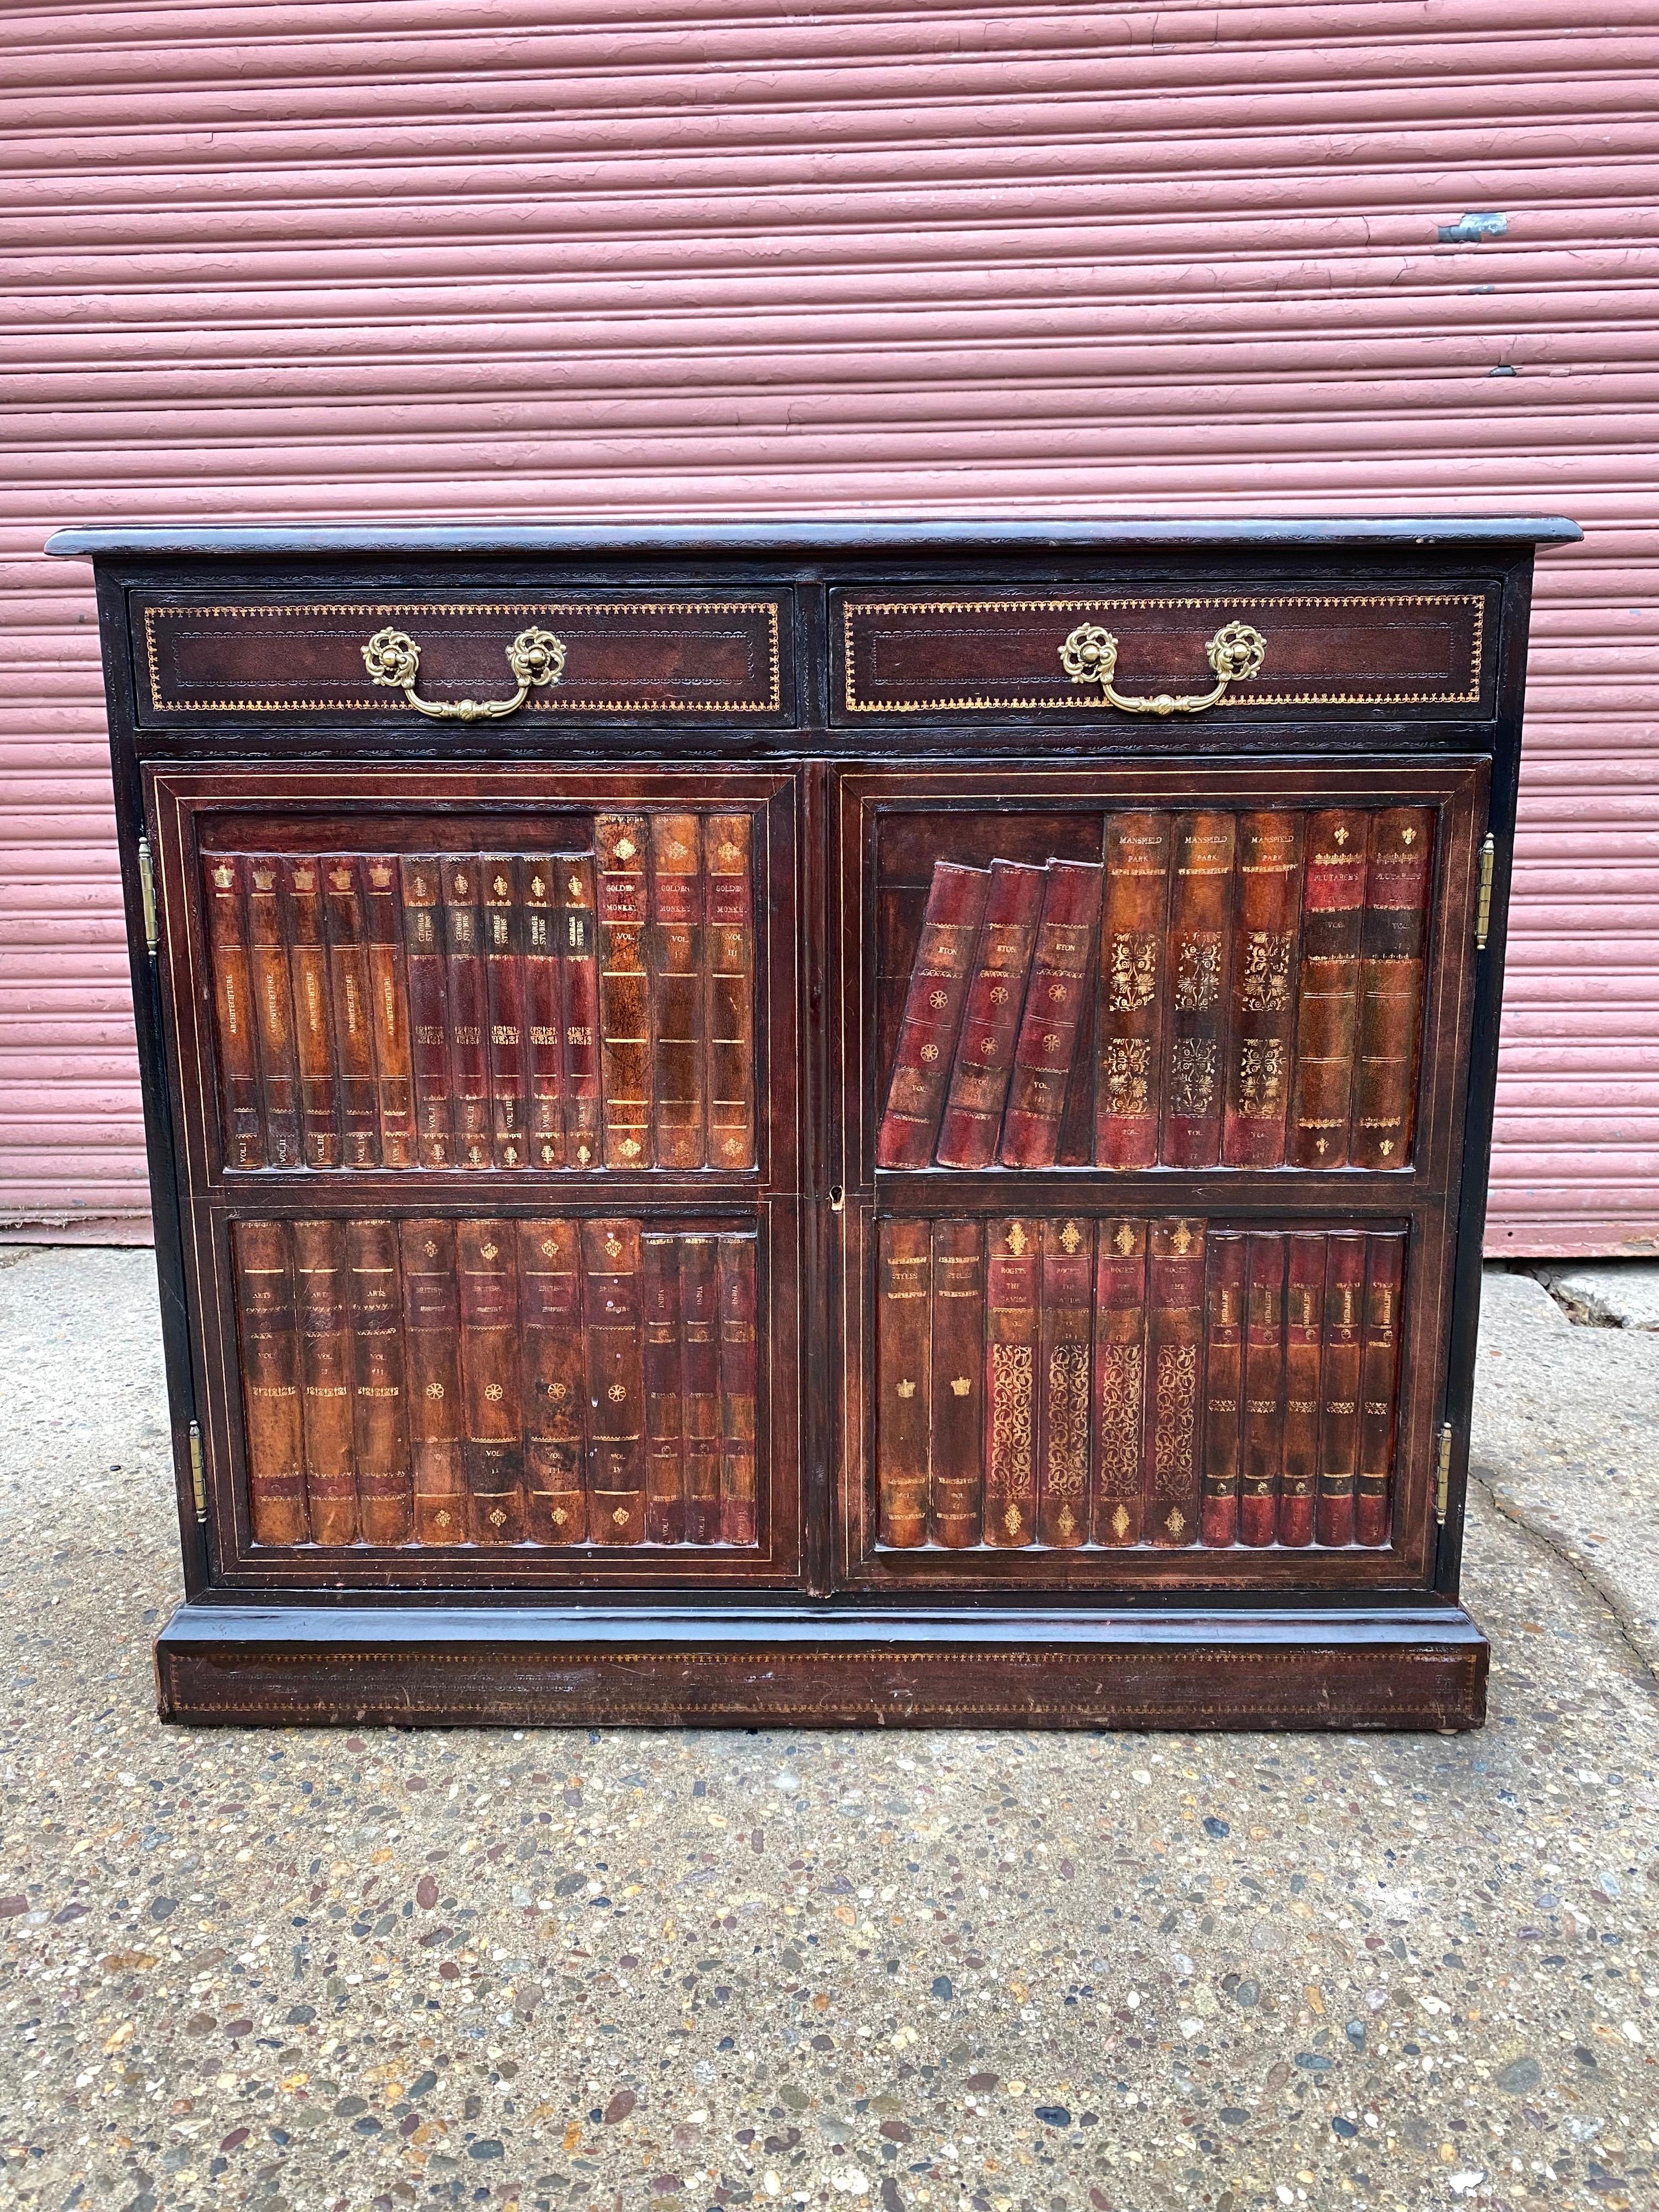 Maitland Smith leather faux bookcase 2 door cabinet with 2 pull out drawers. Clever Design with raised book spines and leaning books. Very nice condition! Great Scale and size, only 14.5 deep! Perfect for shallow spots. Brass handles, one adjustable